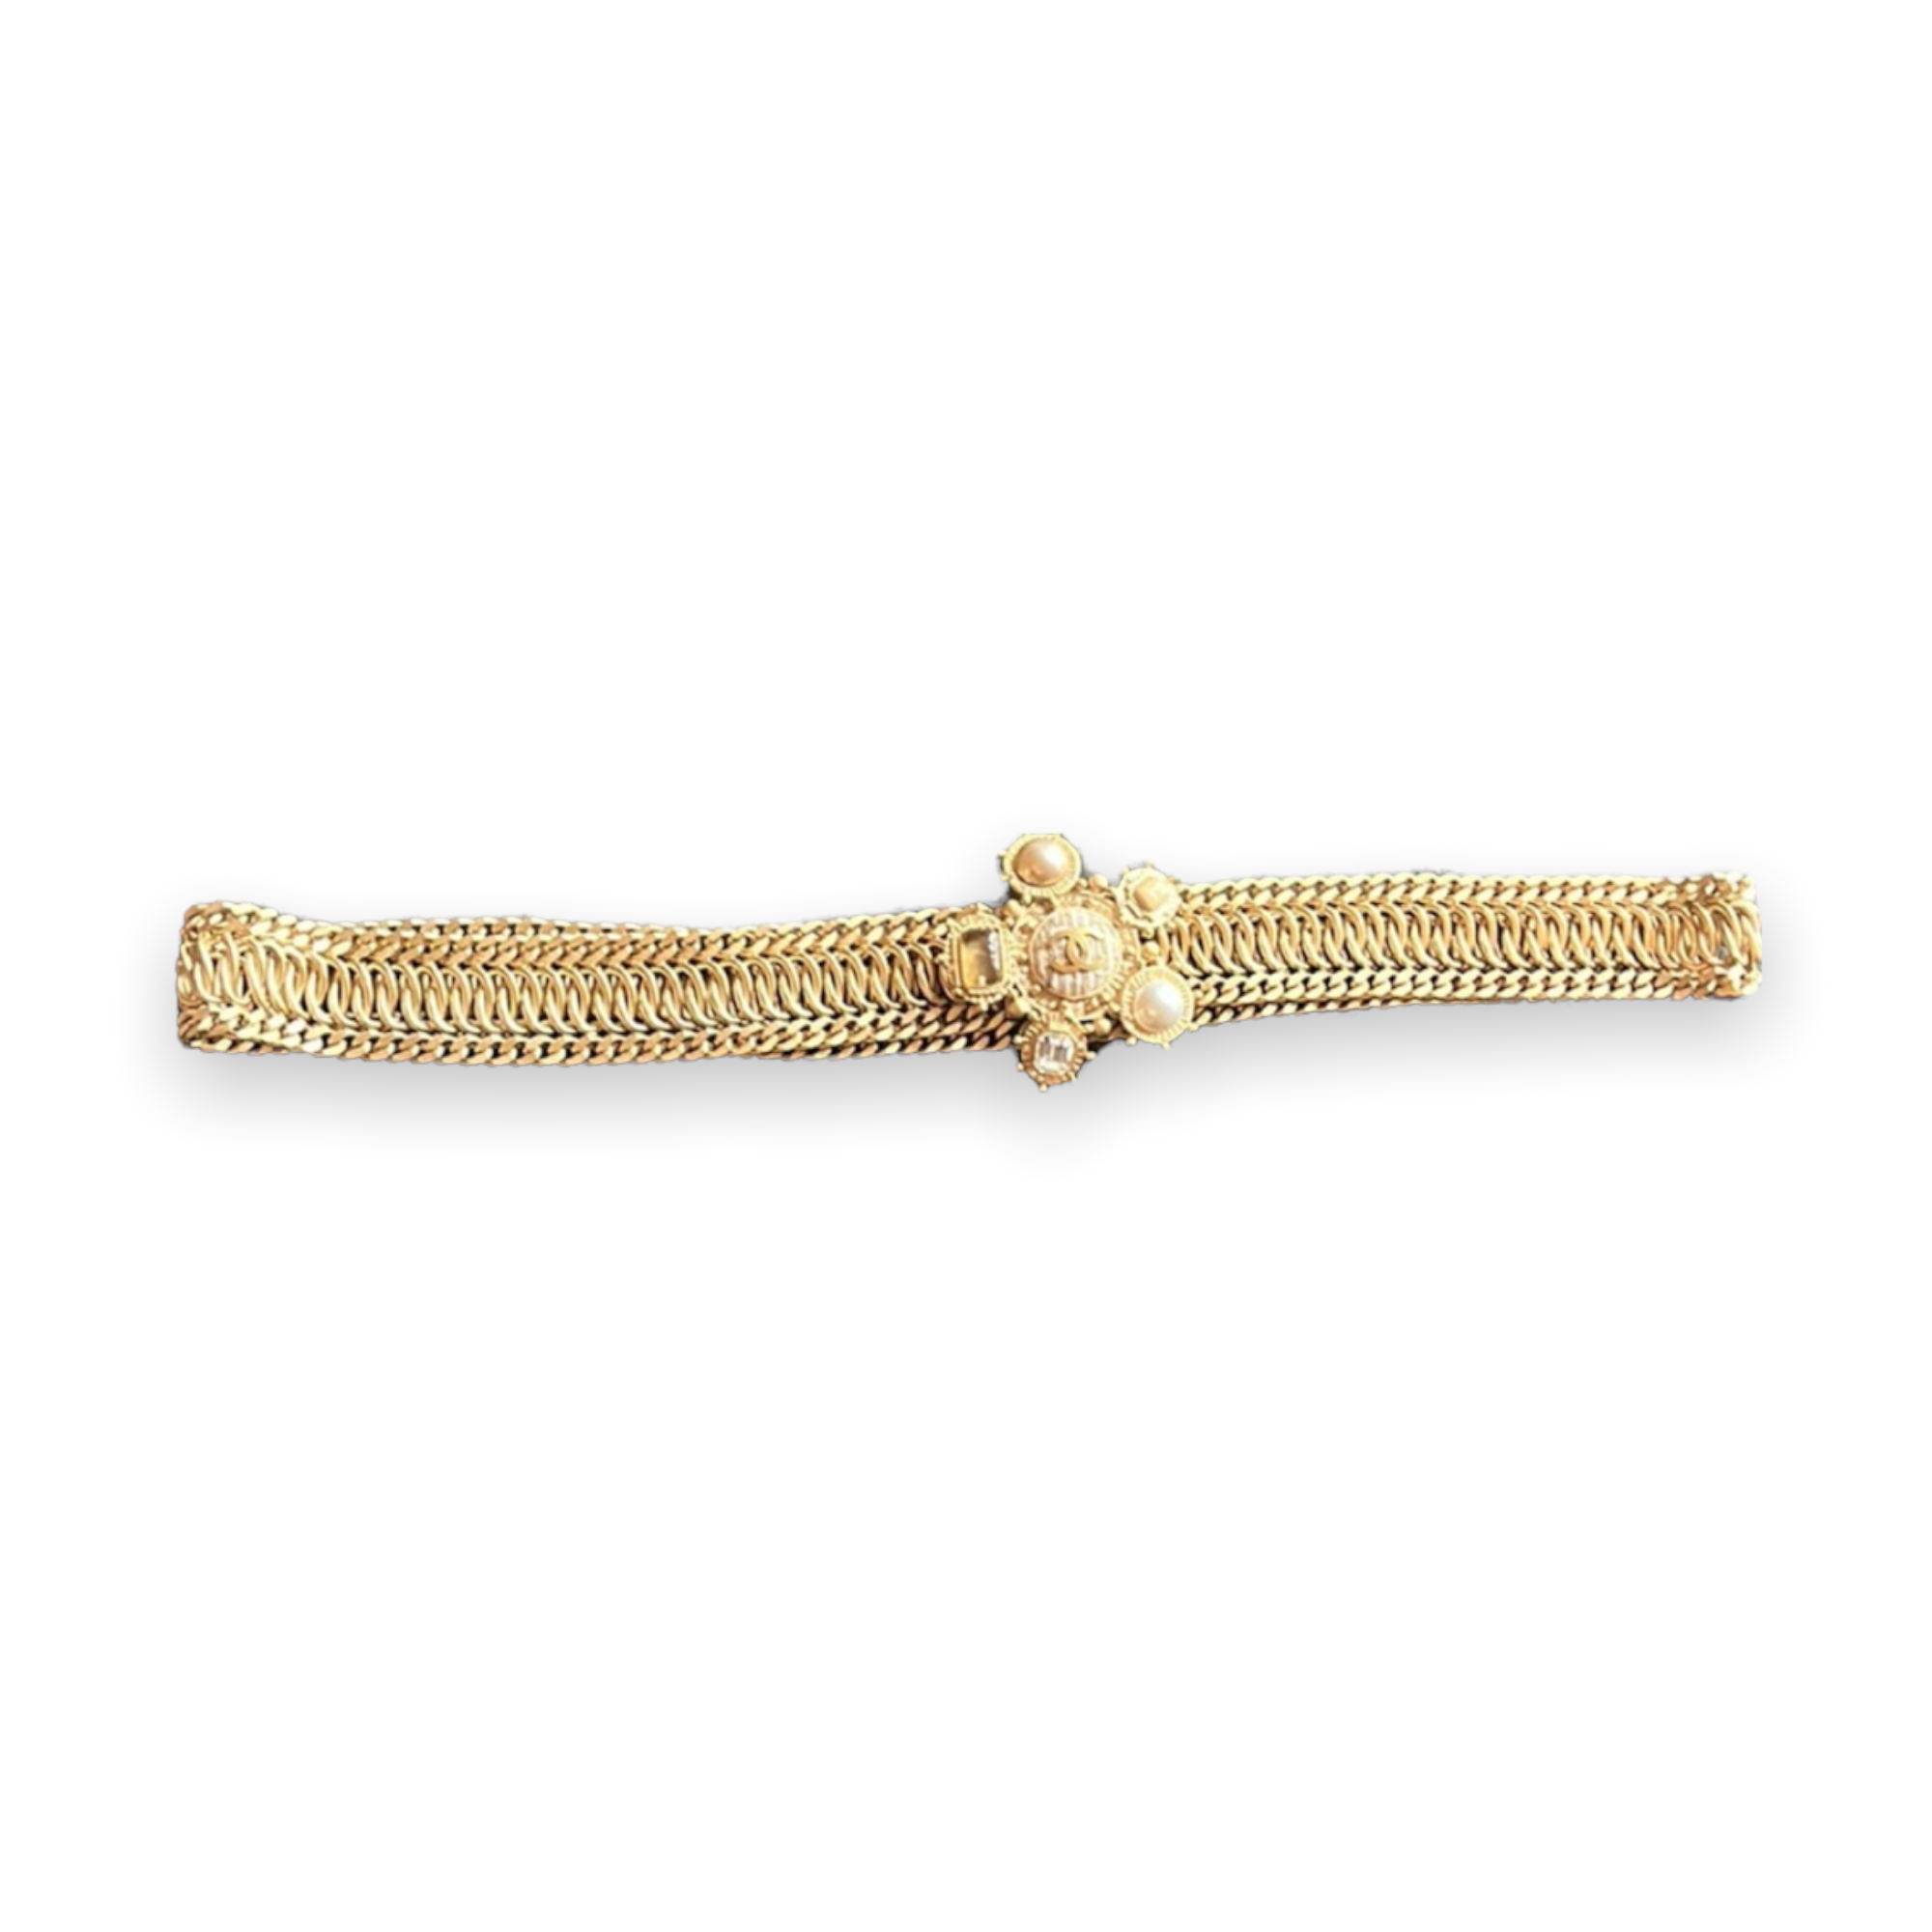 CHANEL Vintage Flattened Gold-Tone Metal Chain Belt with Stone Set Buckle